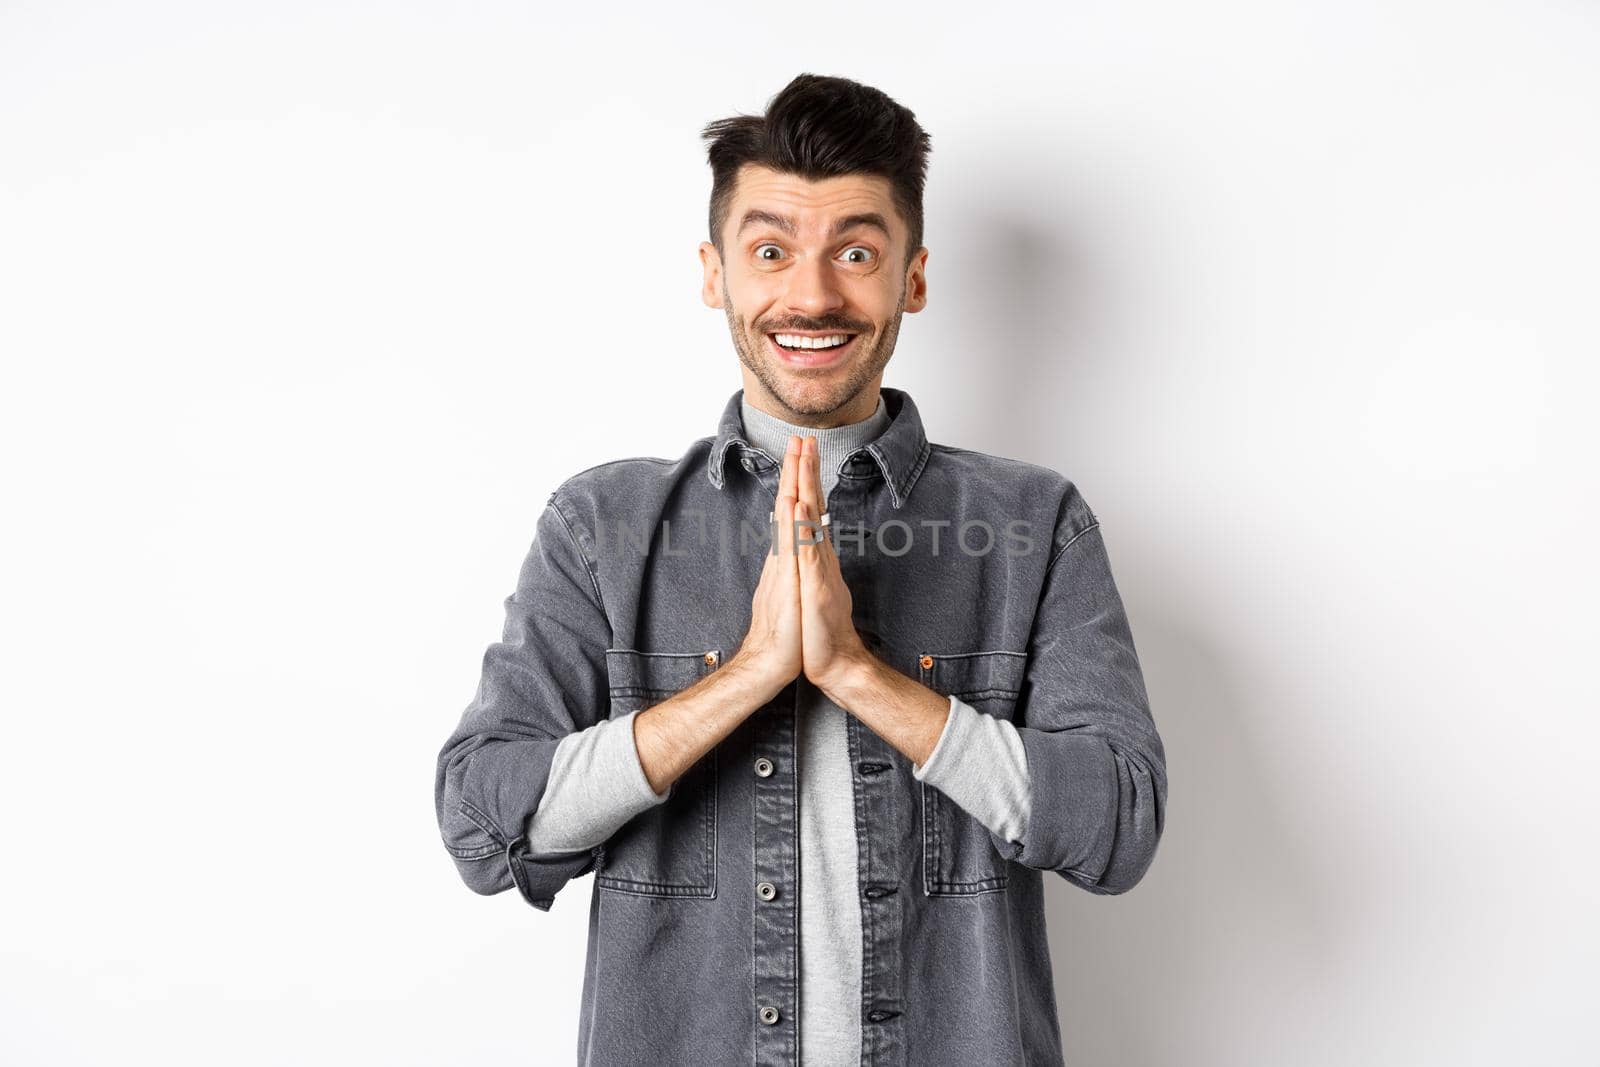 Please help me. Smiling cute man holding hands in namaste gesture, asking for favour, saying thank you, looking hopeful and excited at camera, standing on white background.